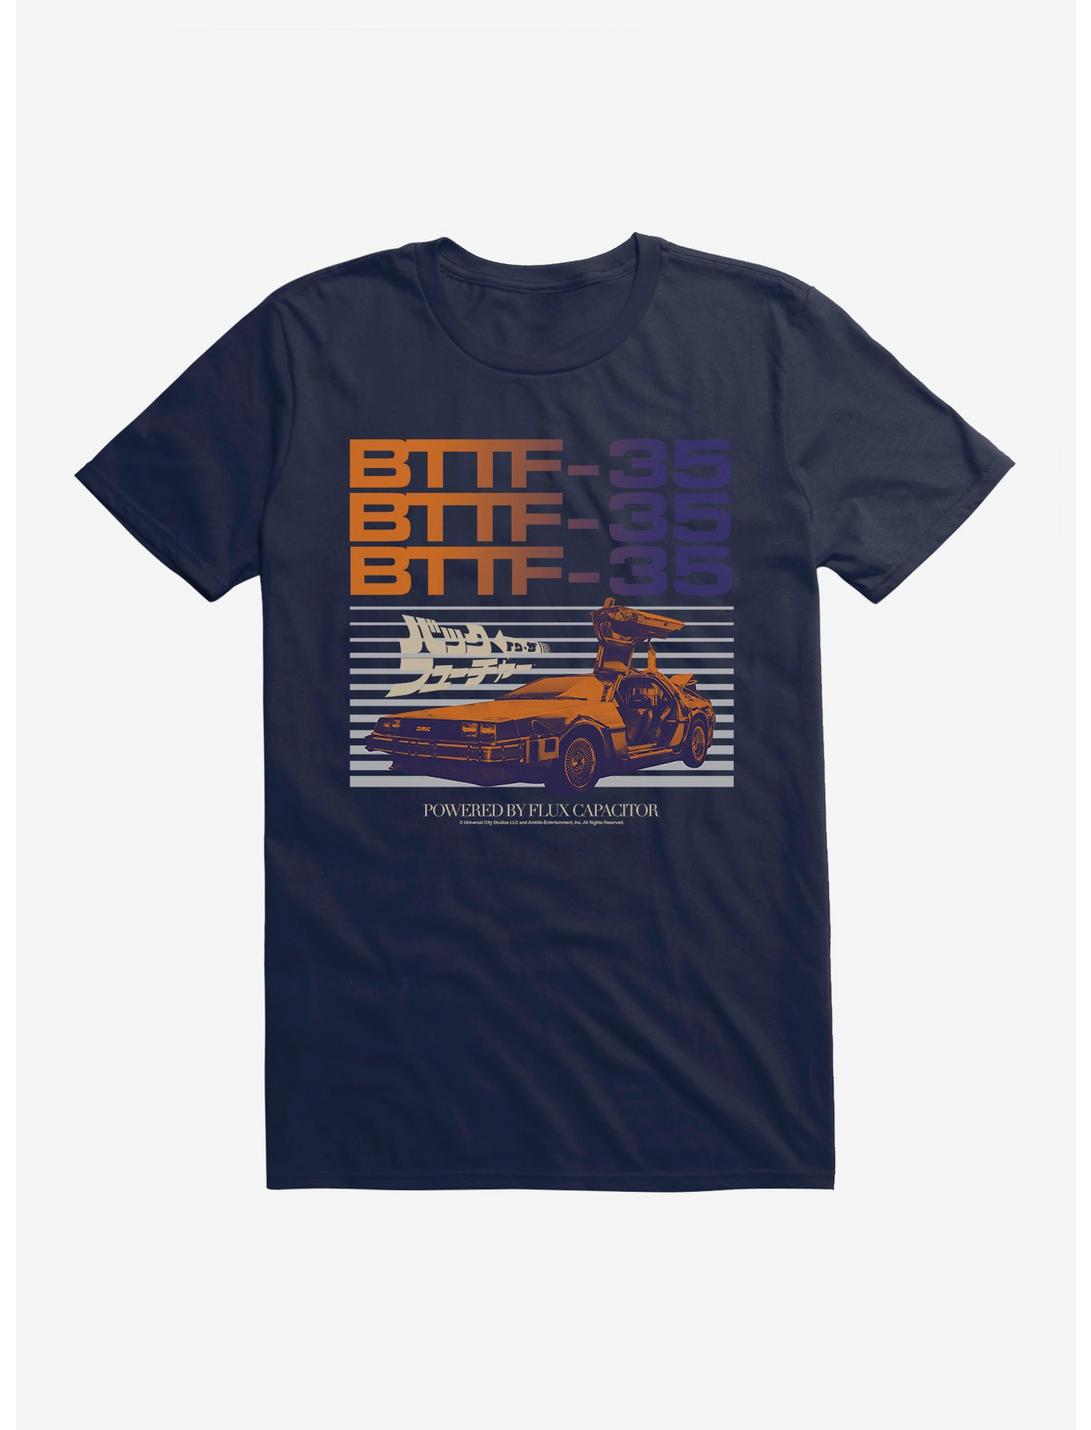 Back To The Future BTTF-35 Stack T-Shirt, MIDNIGHT NAVY, hi-res